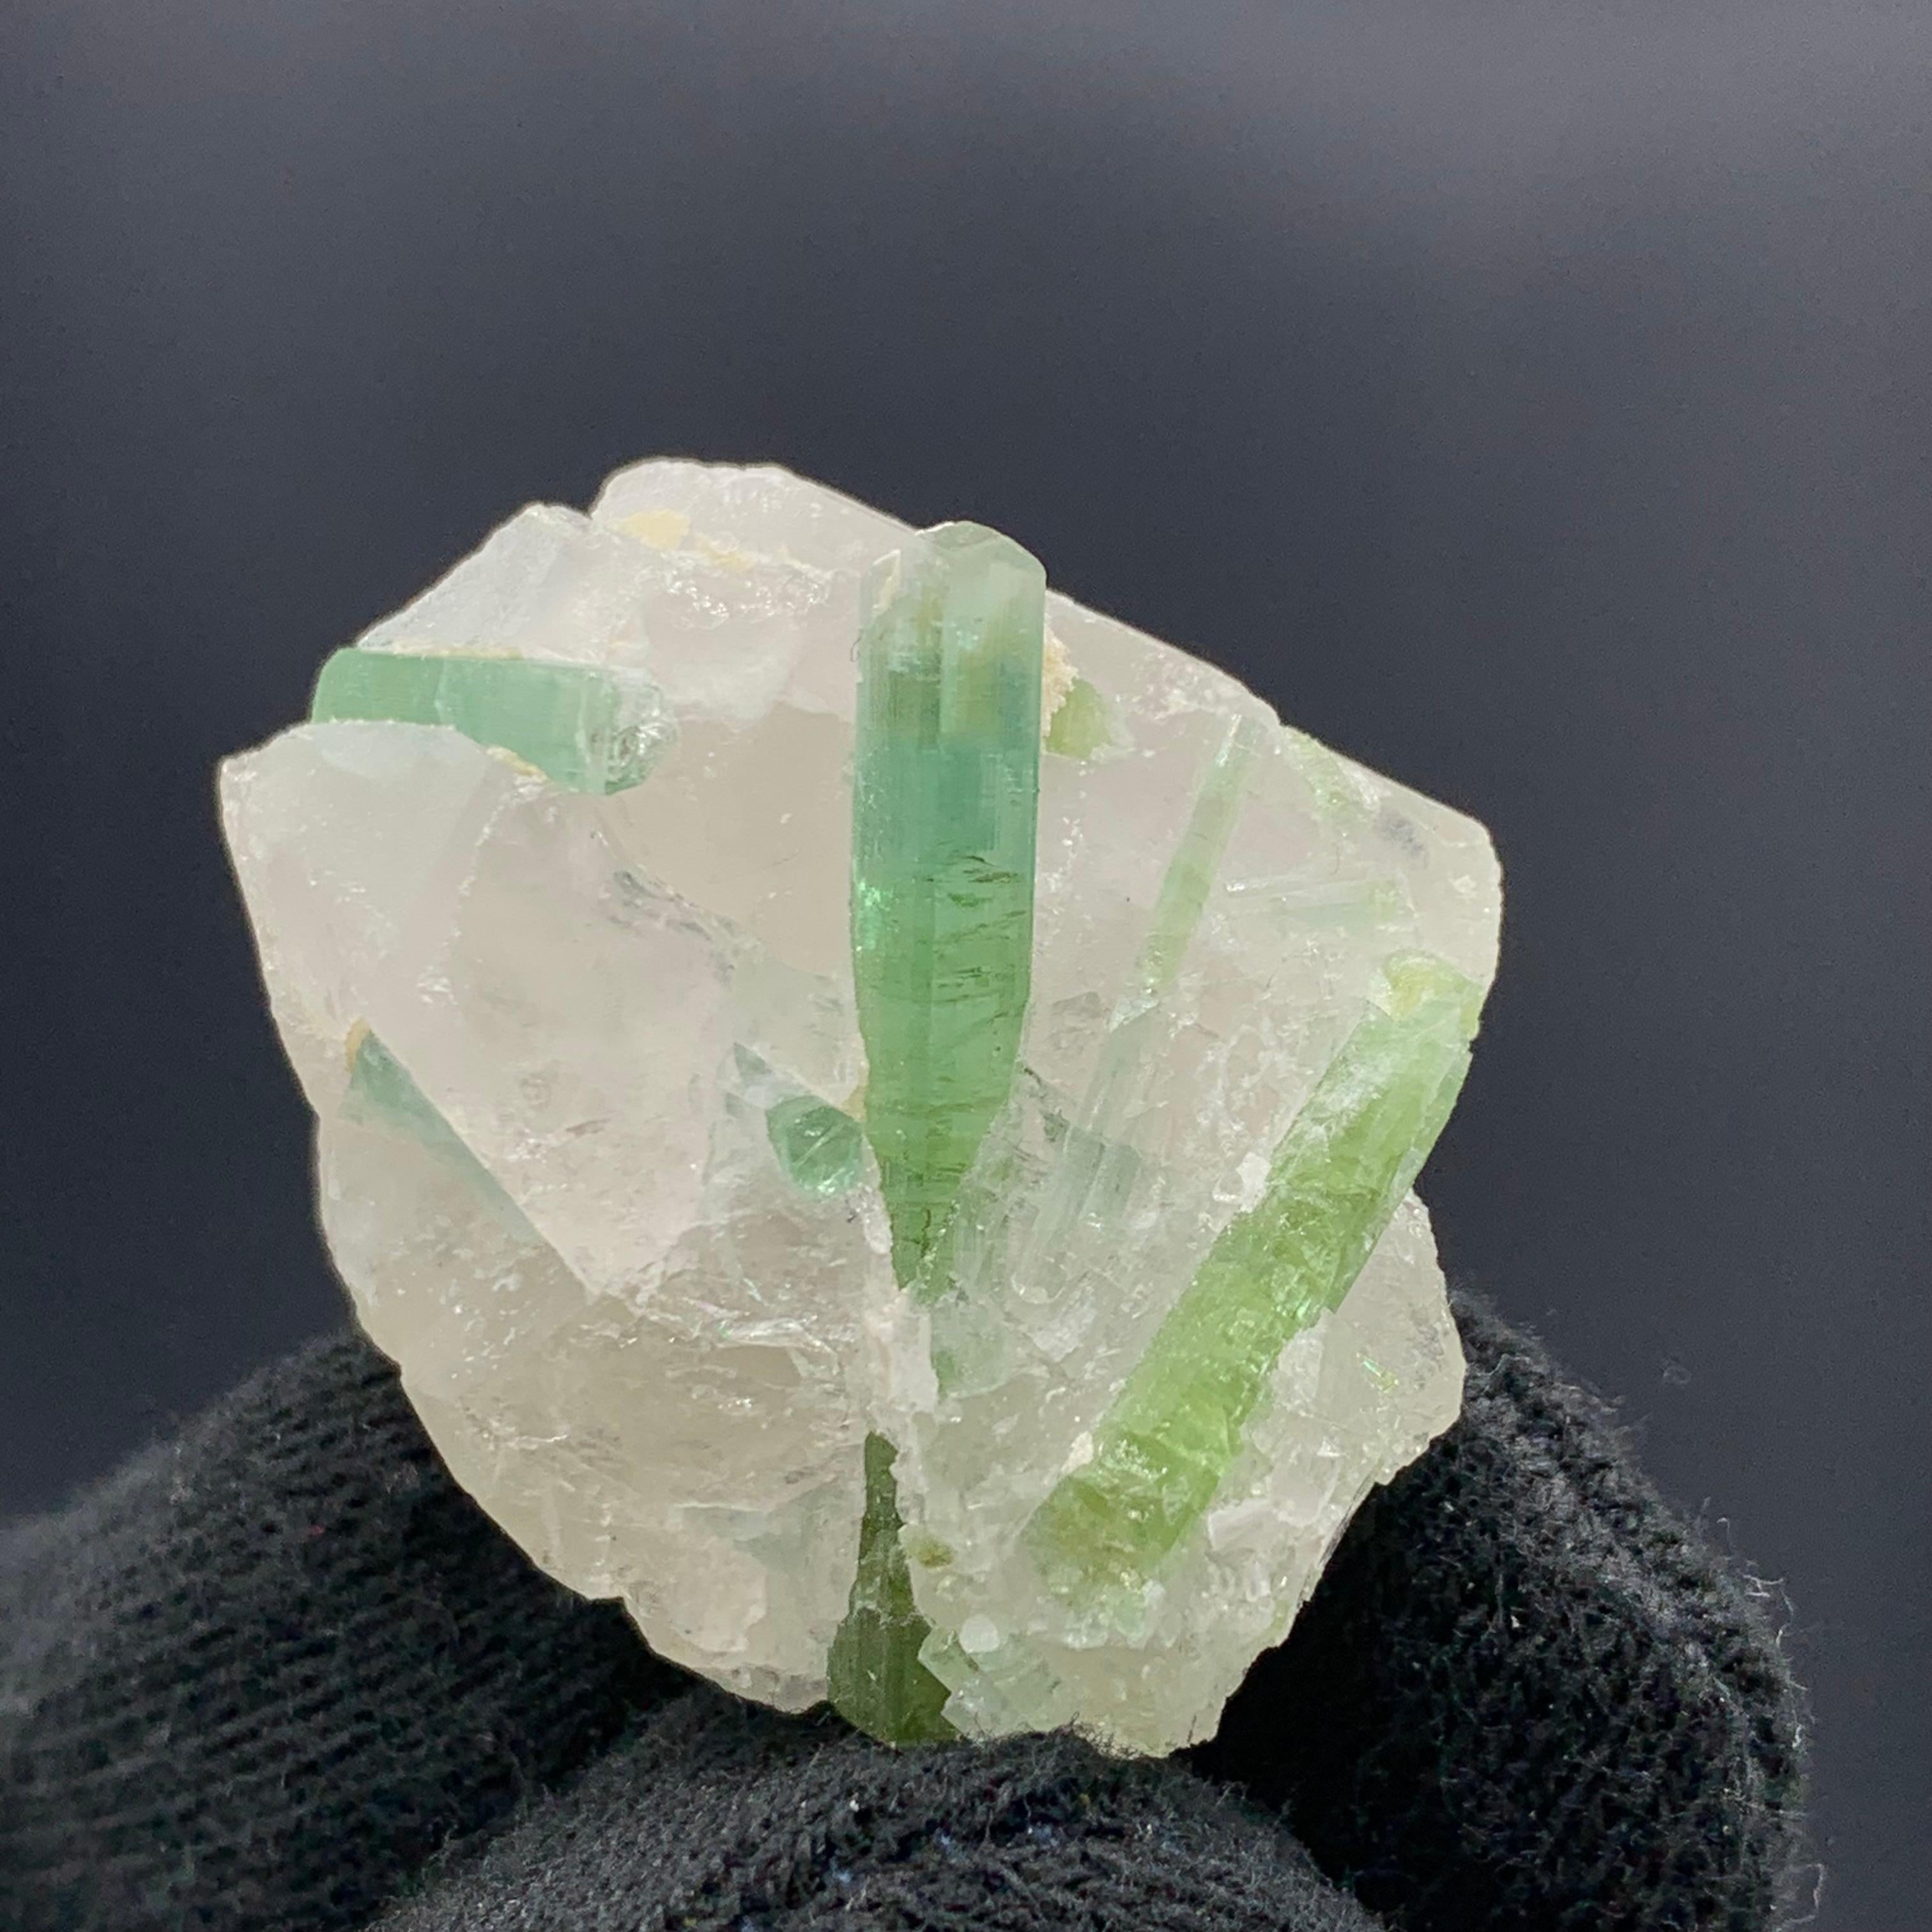 what is the green crystal called